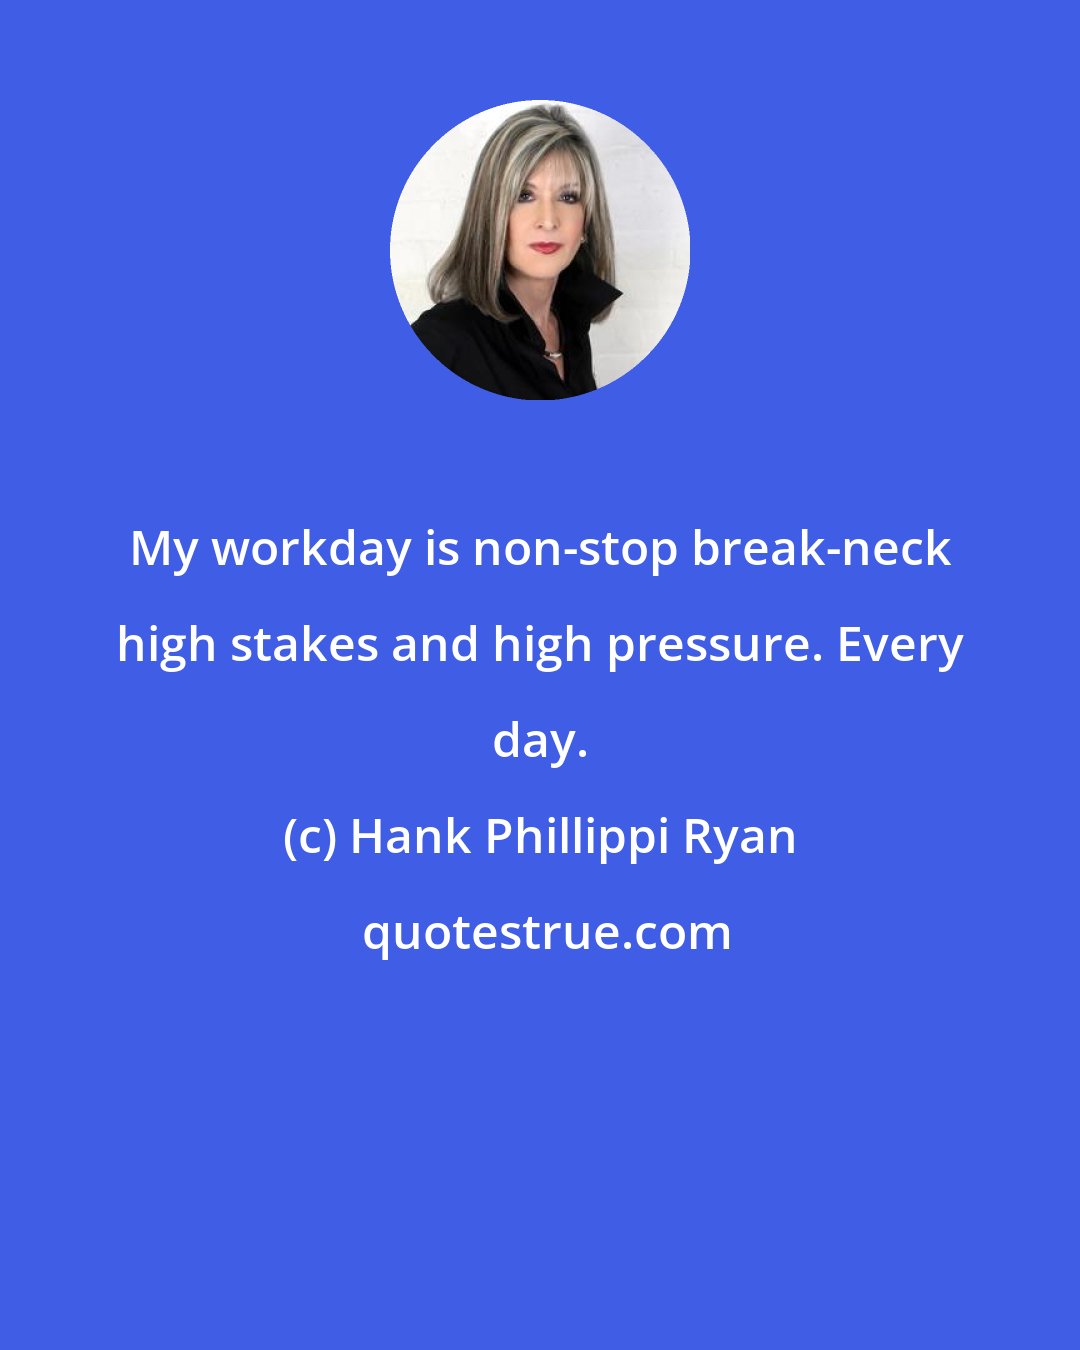 Hank Phillippi Ryan: My workday is non-stop break-neck high stakes and high pressure. Every day.